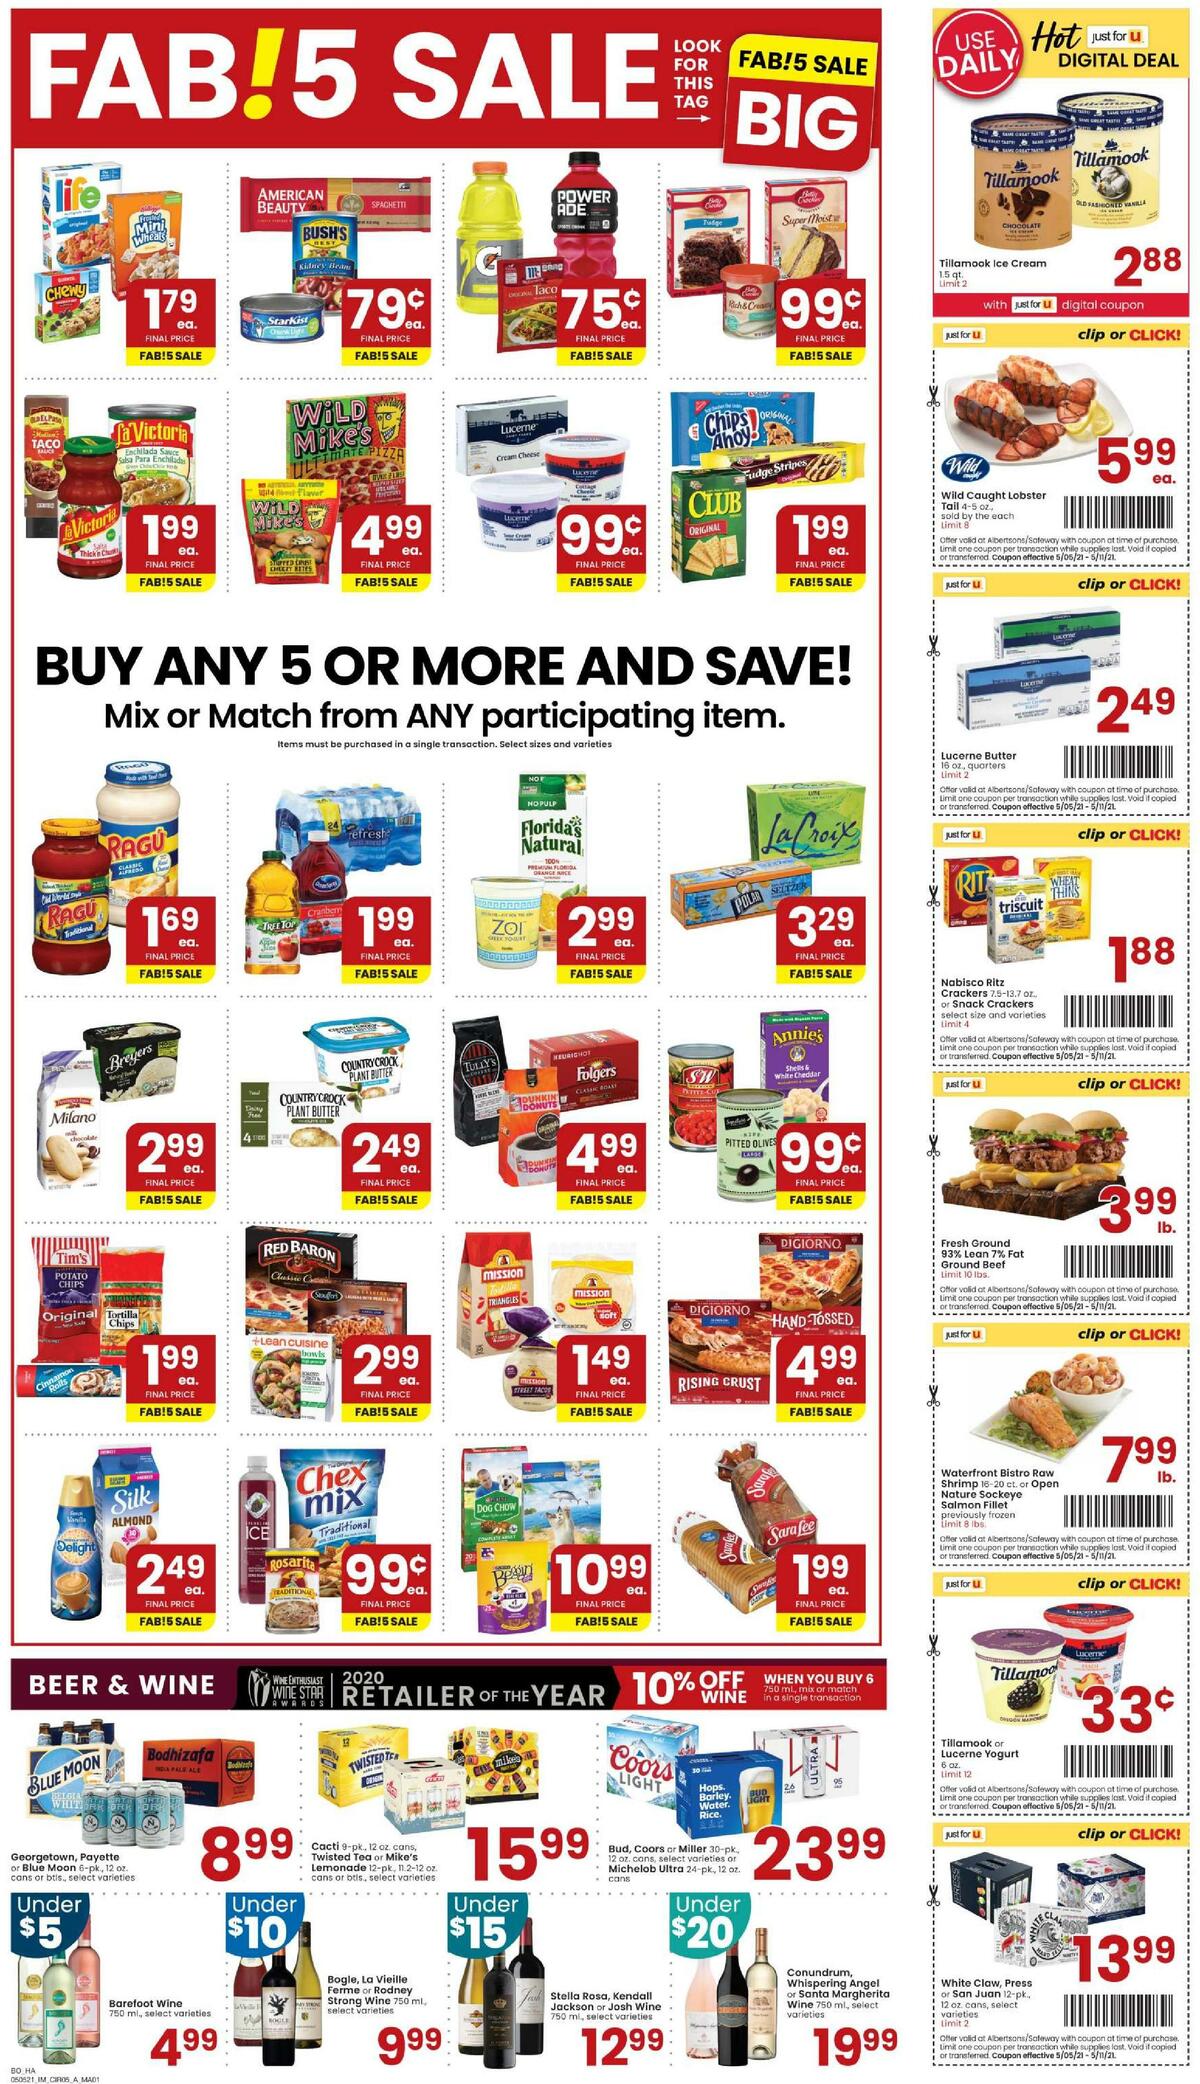 Albertsons Weekly Ad from May 5